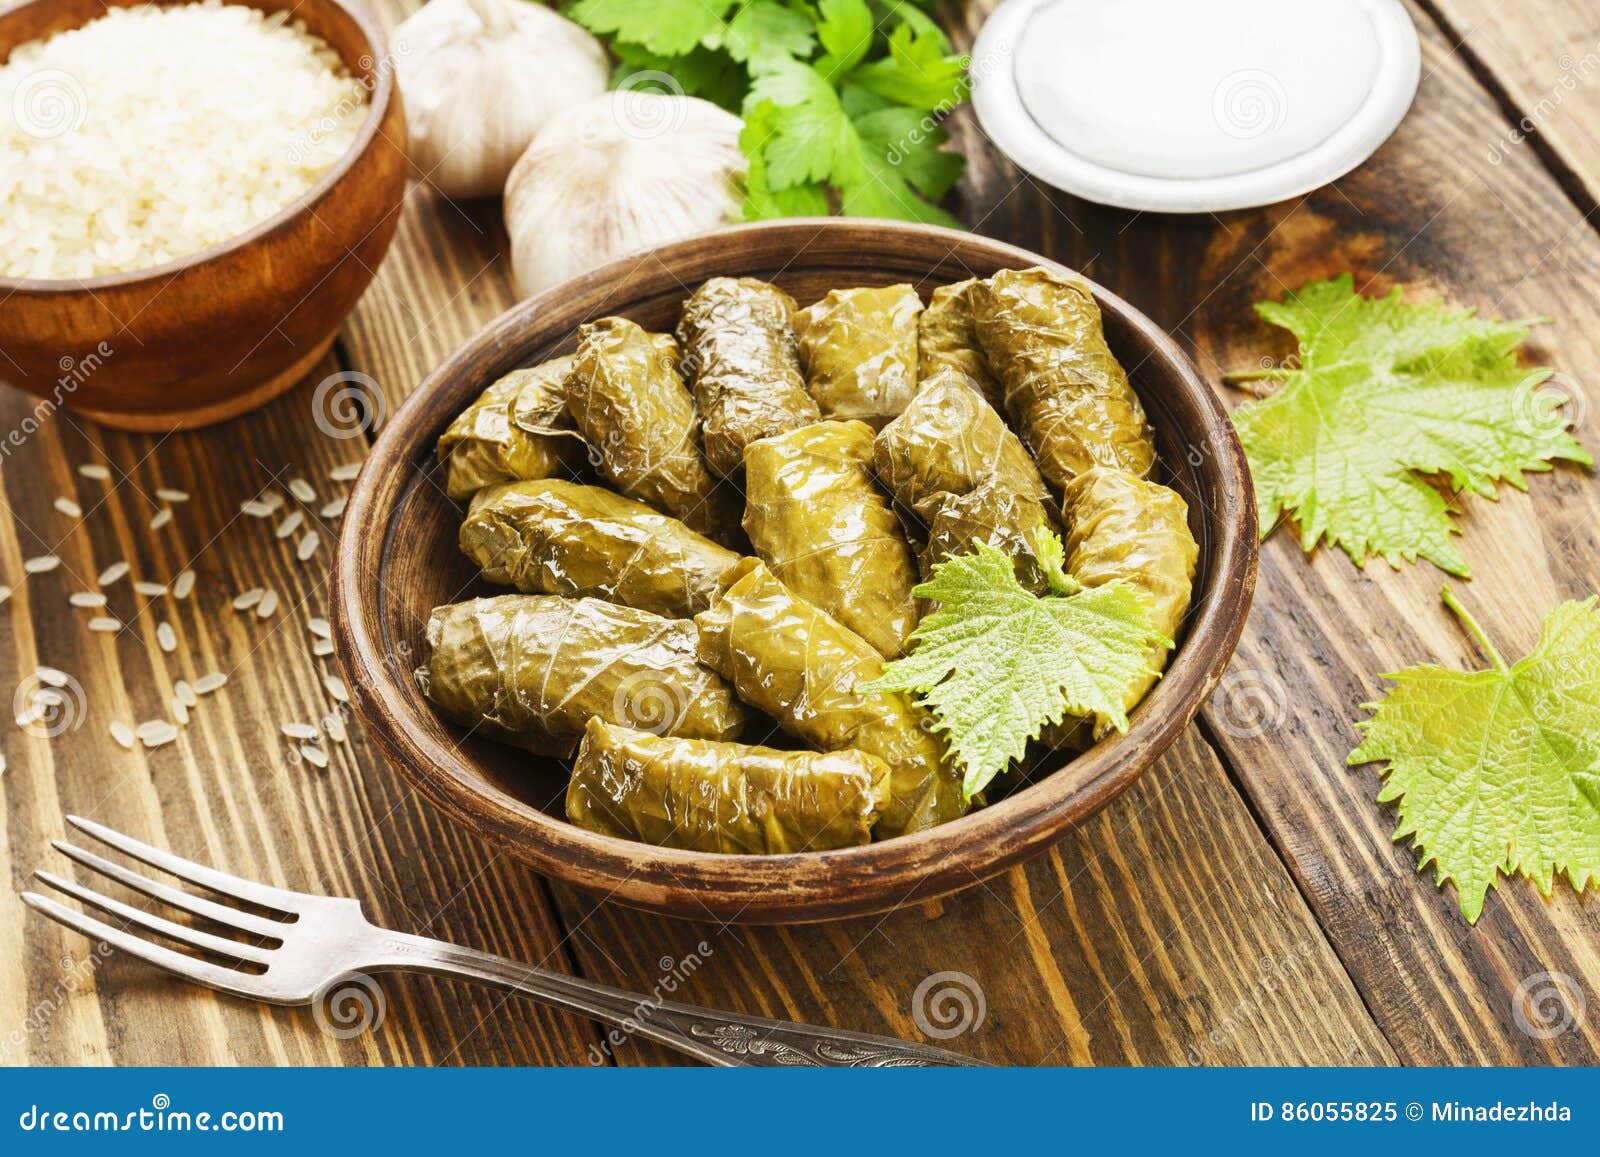 dolma on the plate